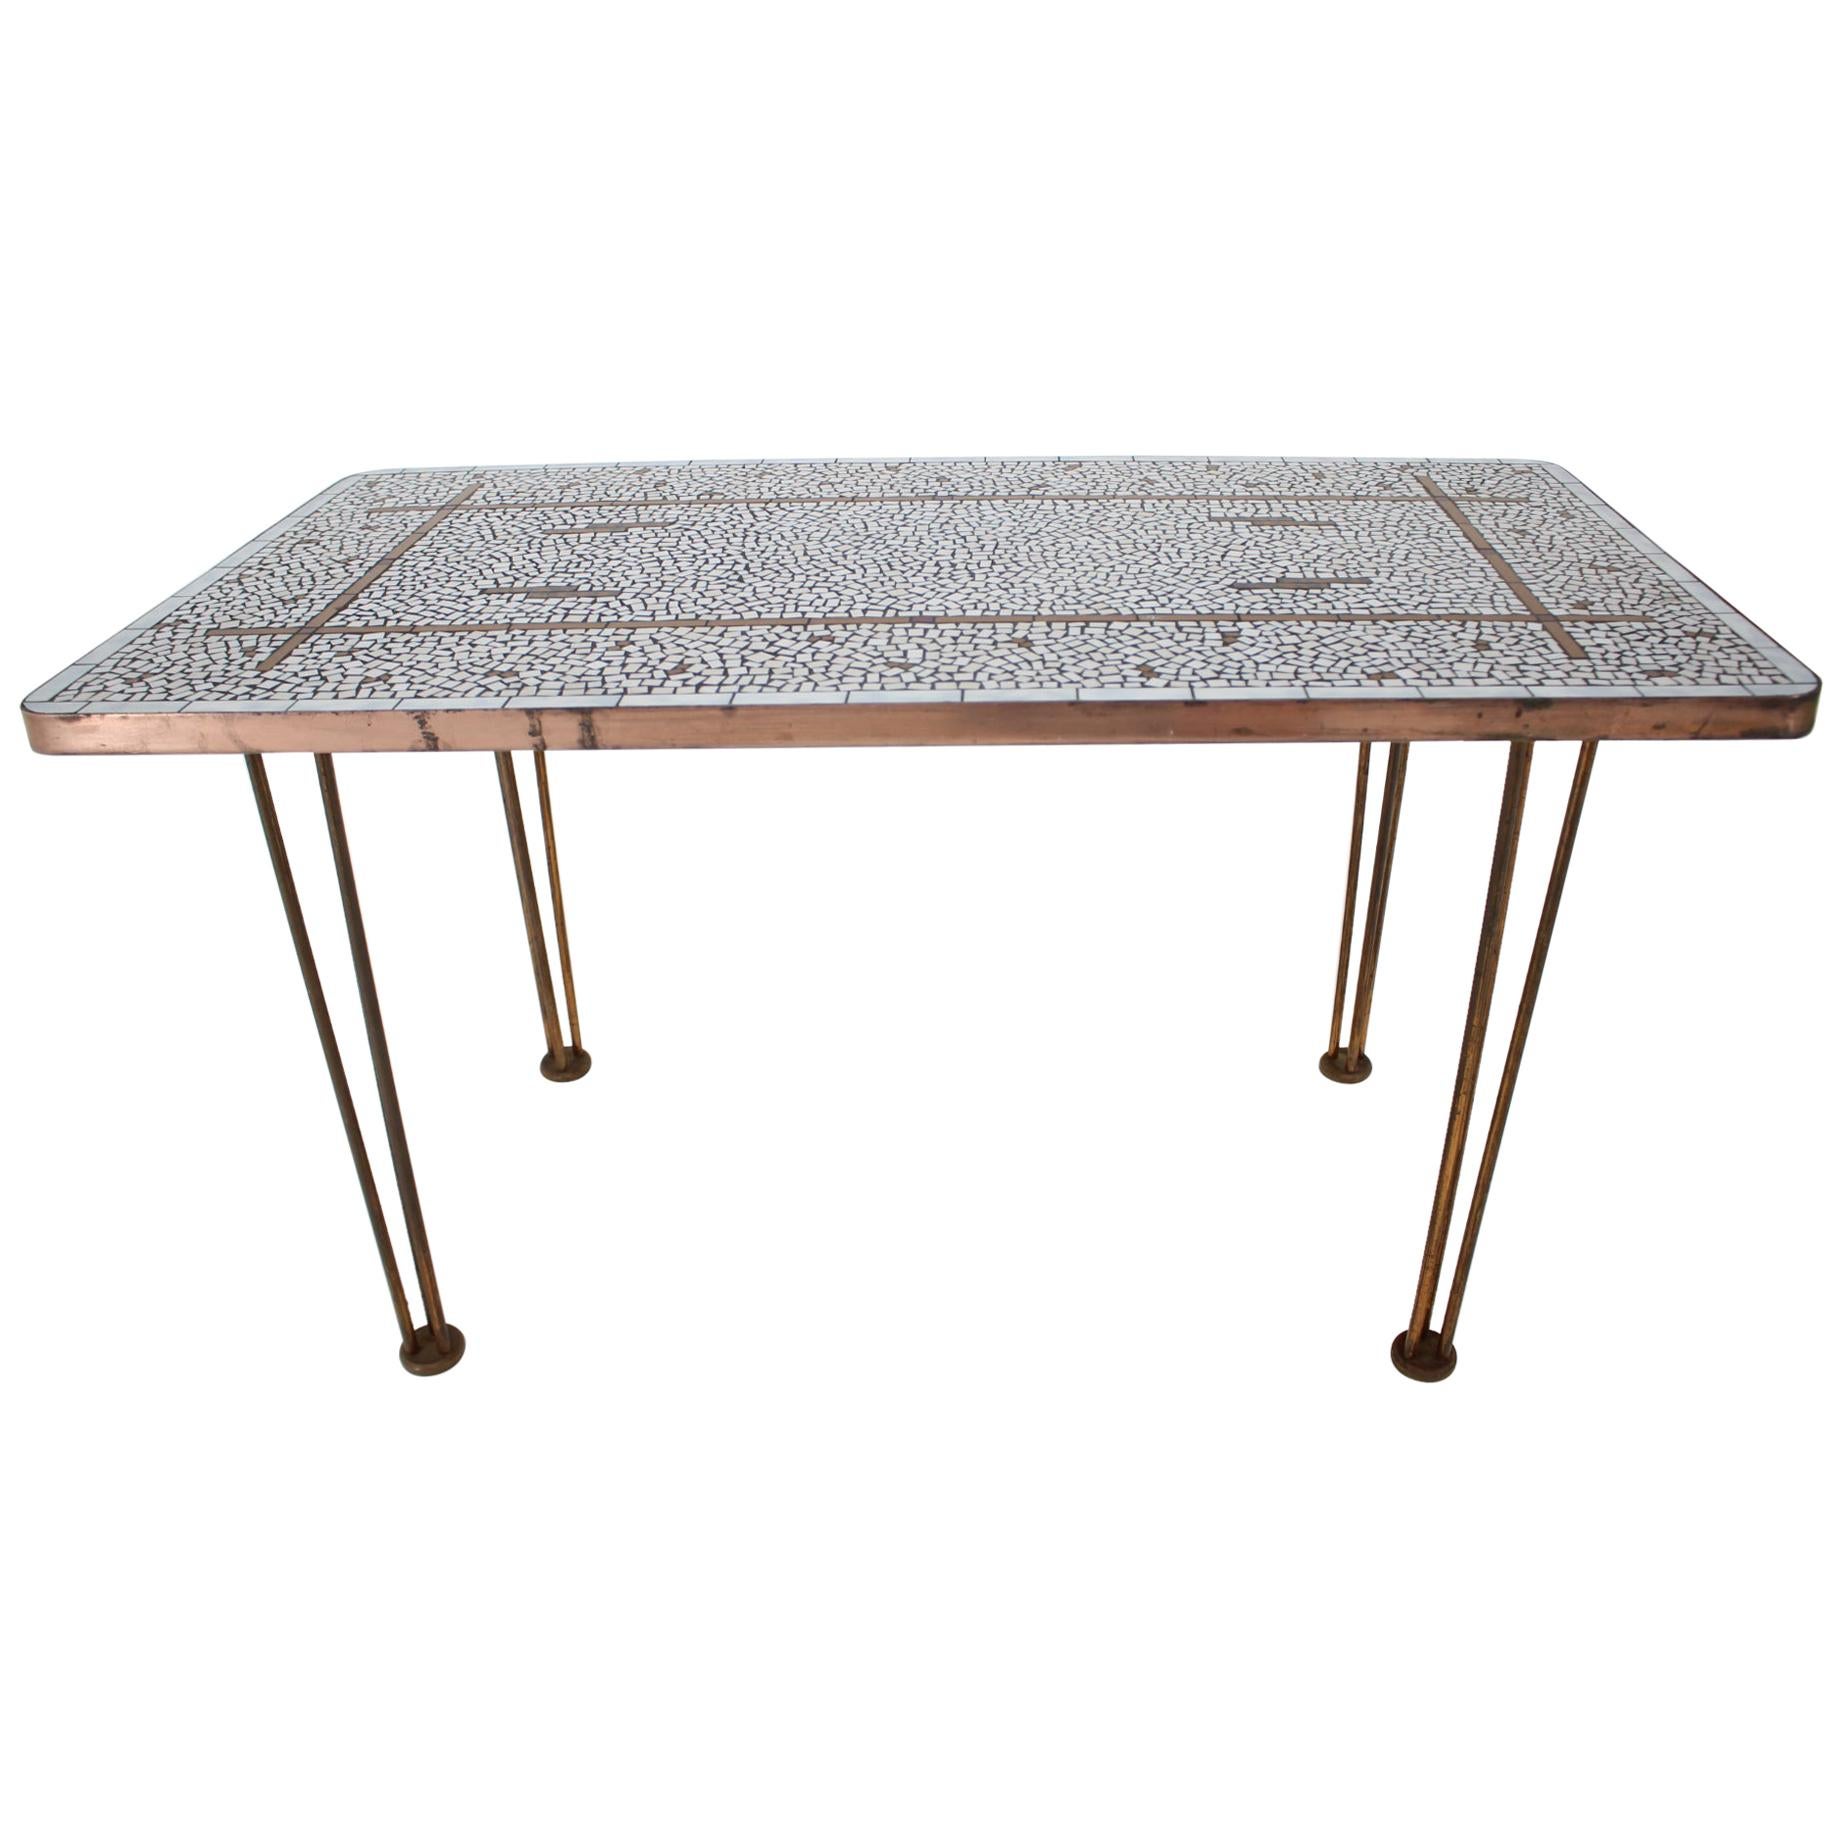 Midcentury Conference Brass Mosaic Table, 1960s For Sale